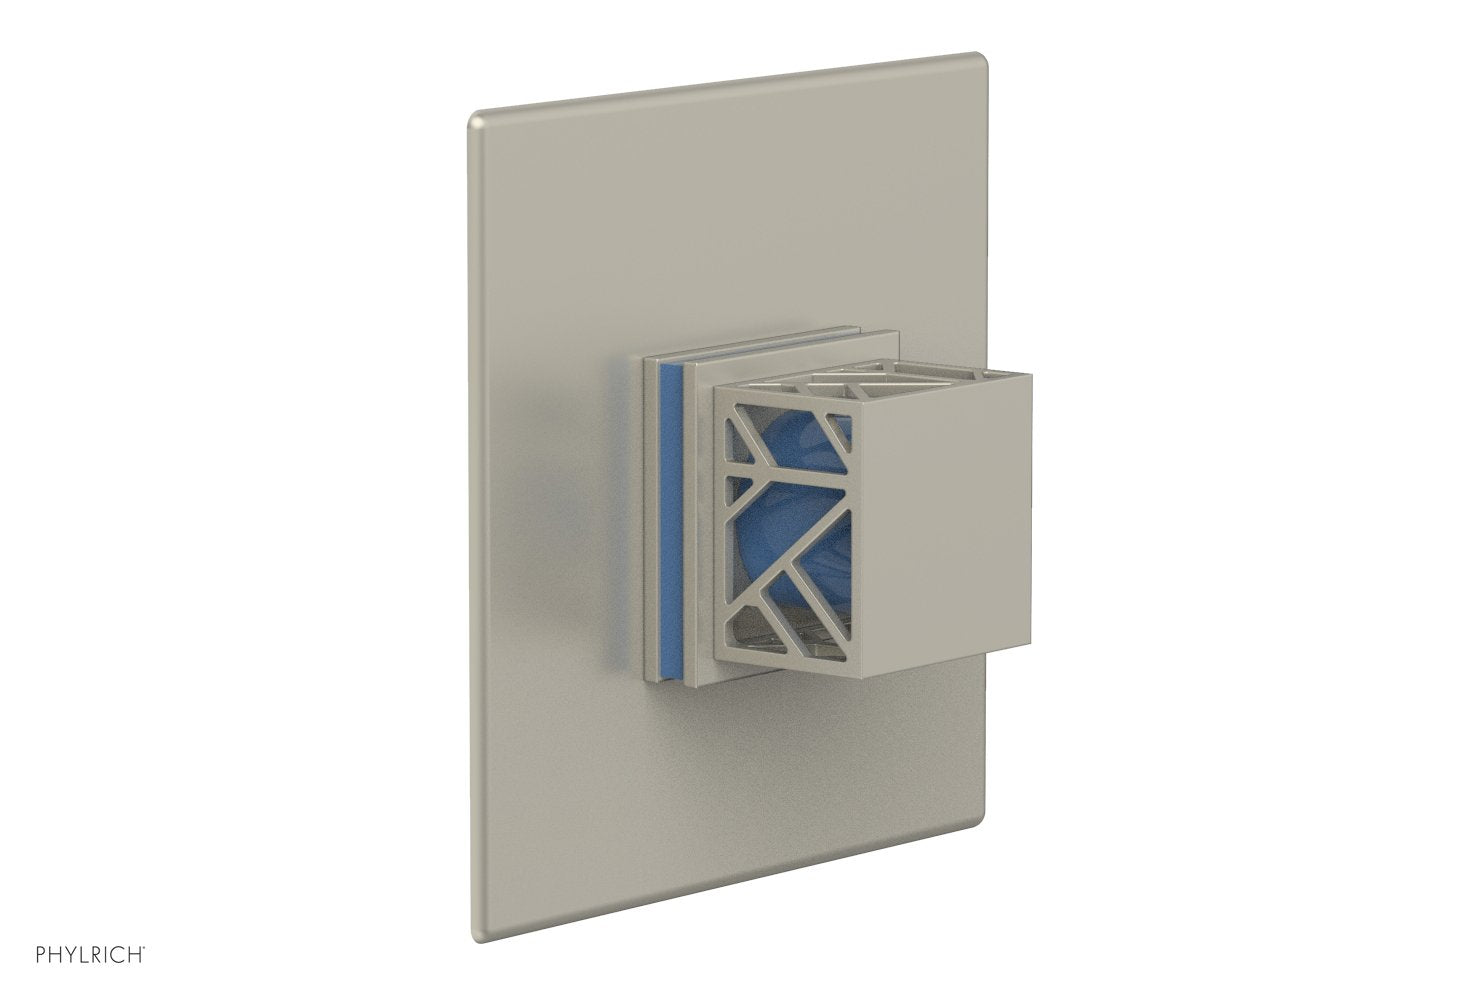 Phylrich JOLIE Pressure Balance Shower Plate & Handle Trim, Square Handle with "Light Blue" Accents